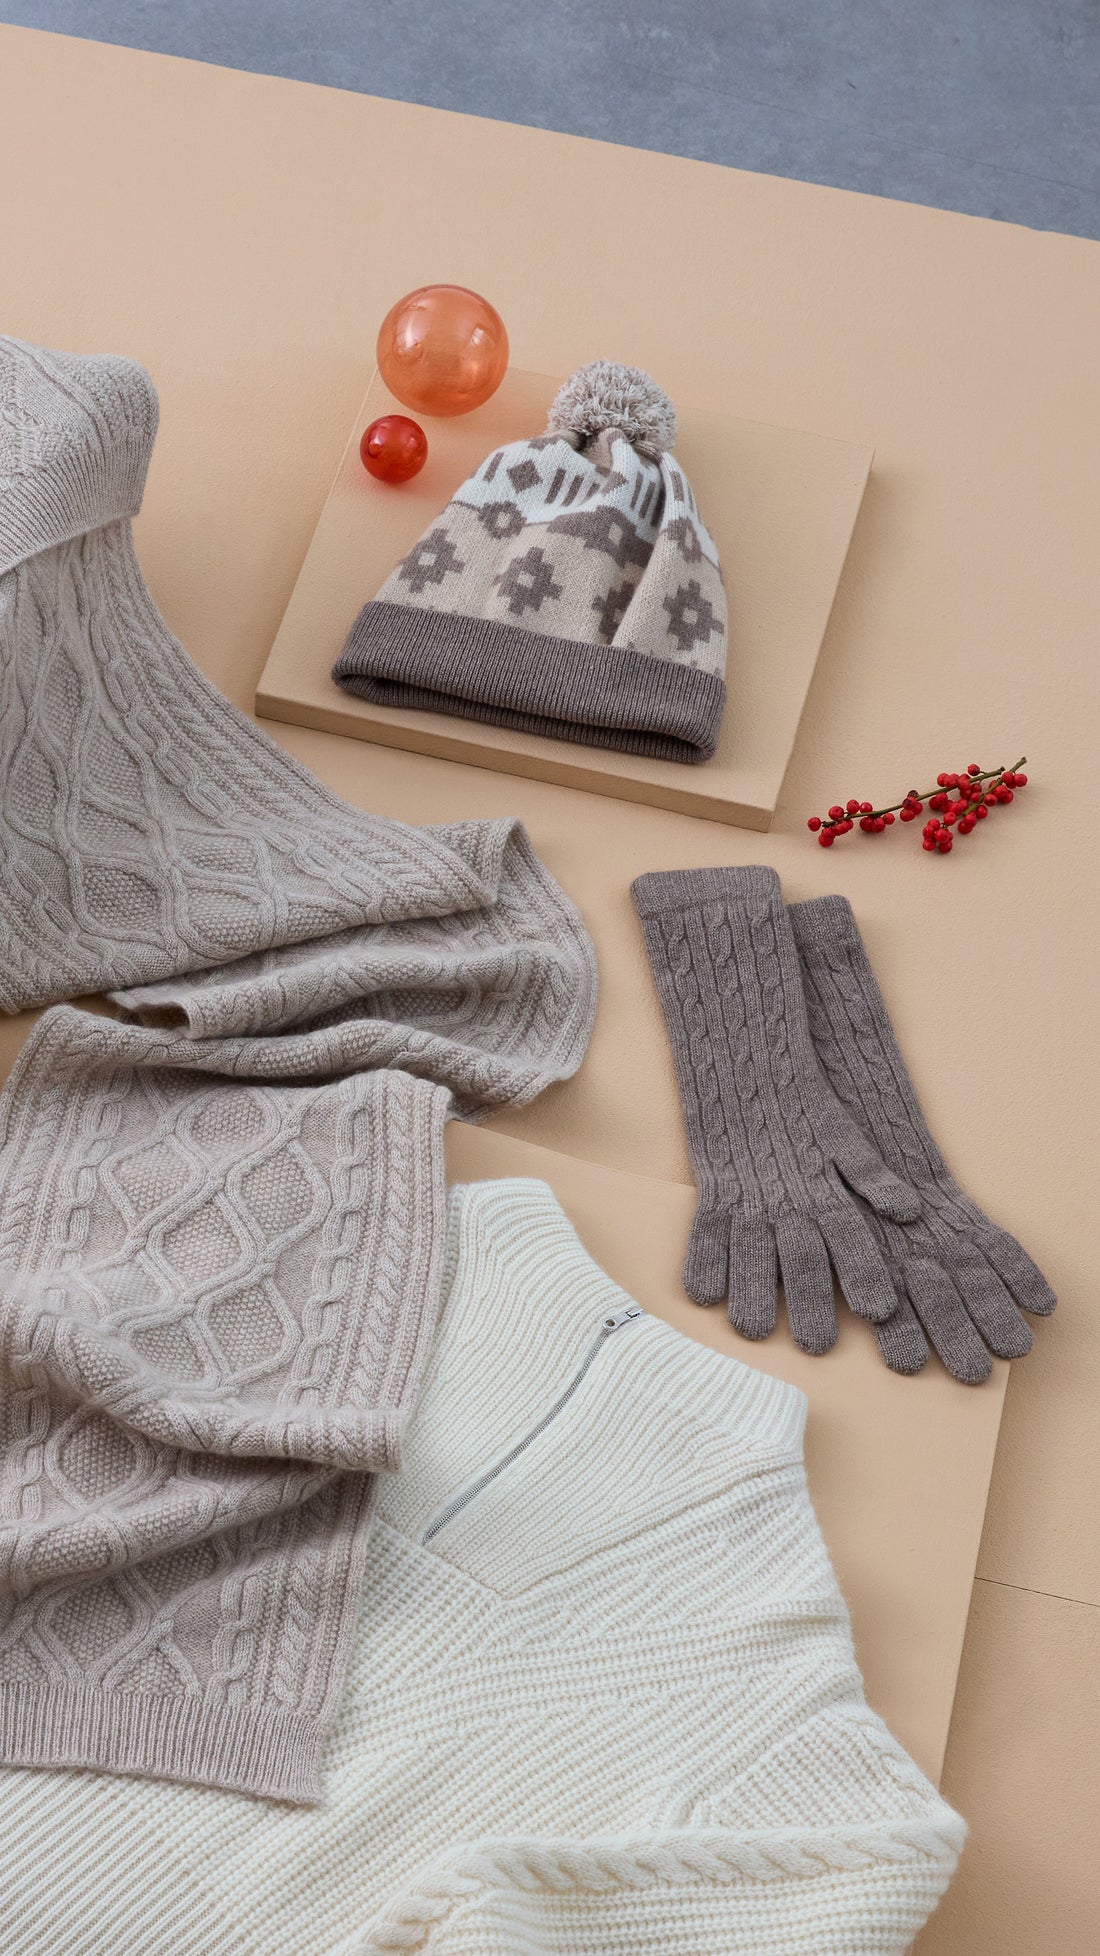 cashmere hat, cashmere scarf, cashmere gloves, cashmere sweater on beige paper ensembled together with Christmas gifts